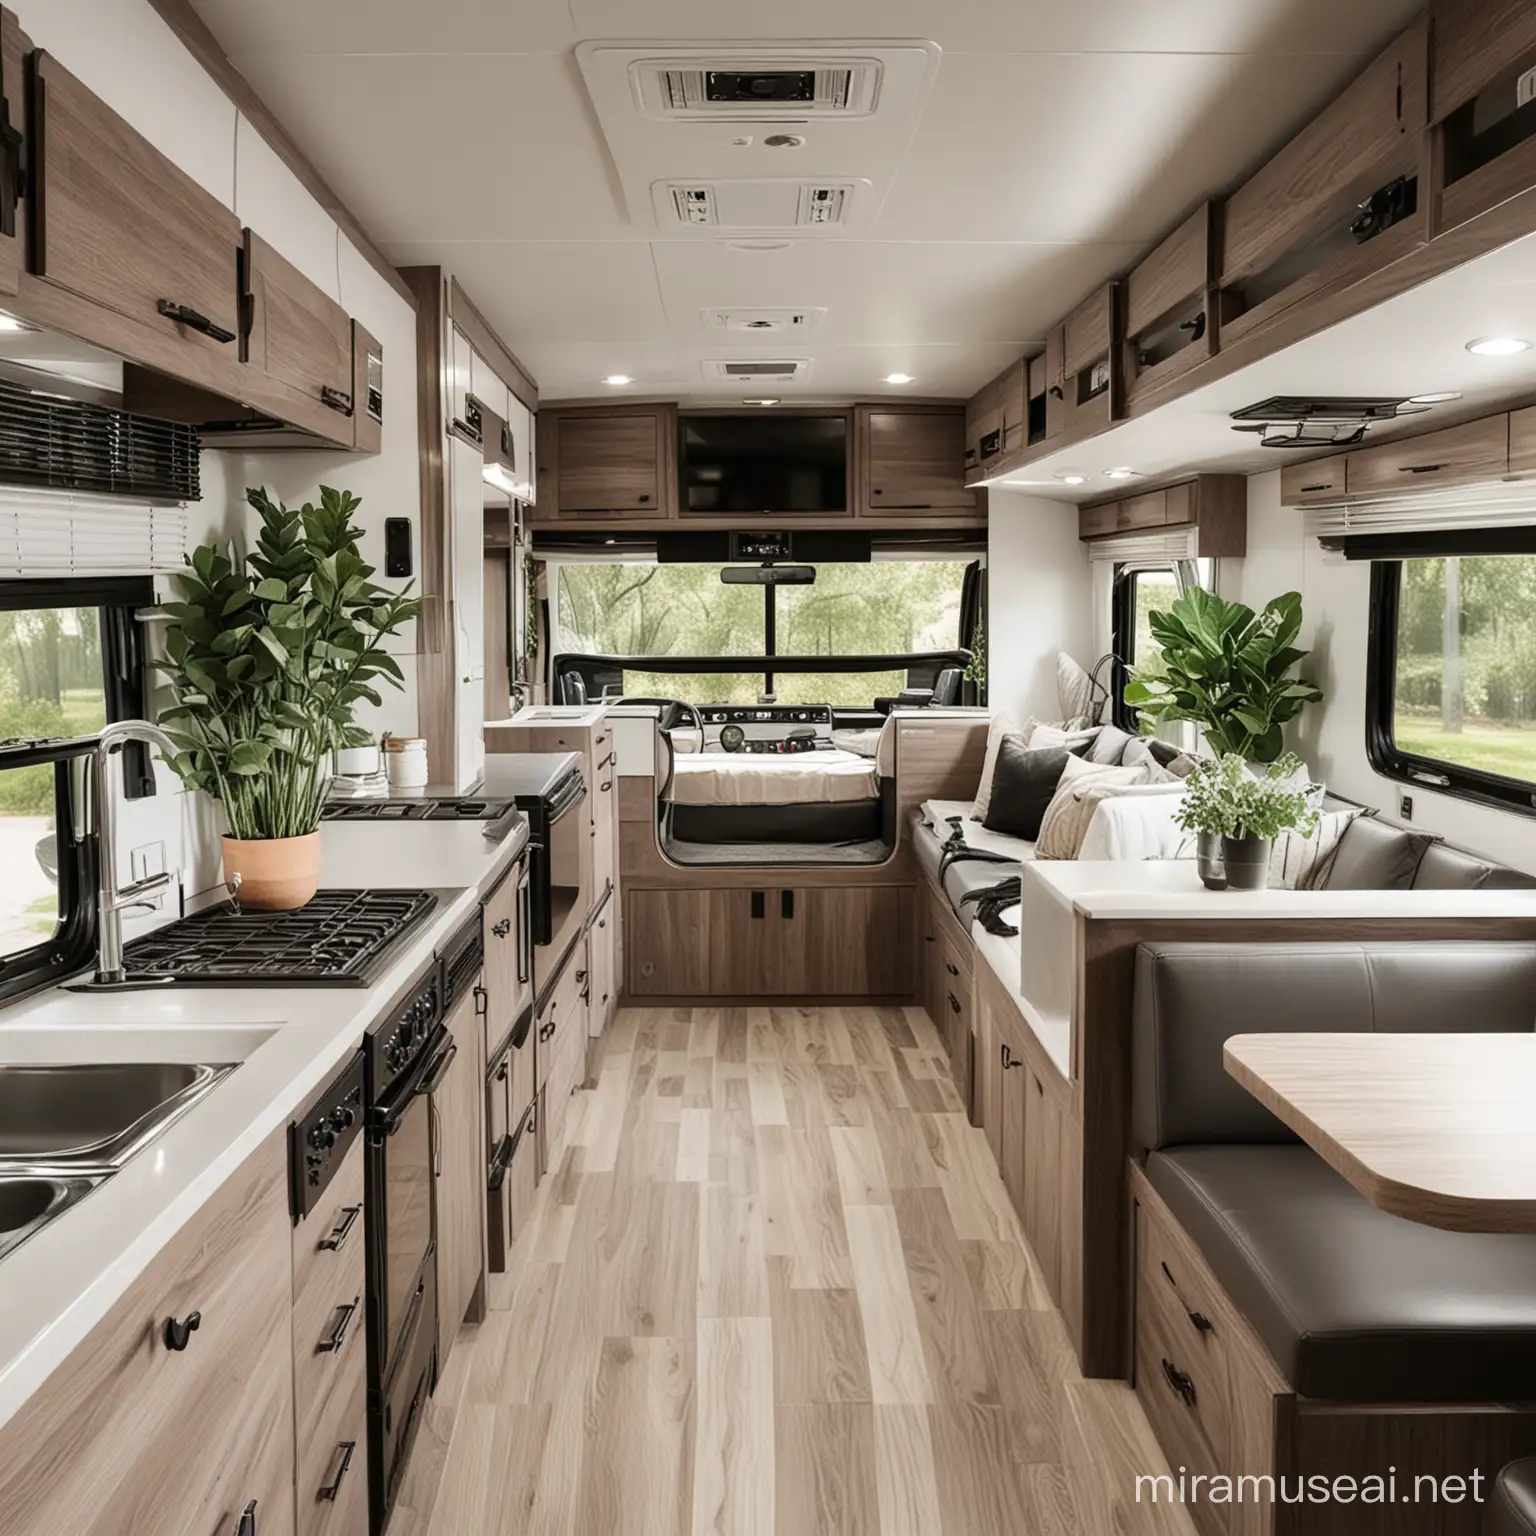 RV interior, modern and realistic, beautiful cabinets and tabletops, foliage, clean.